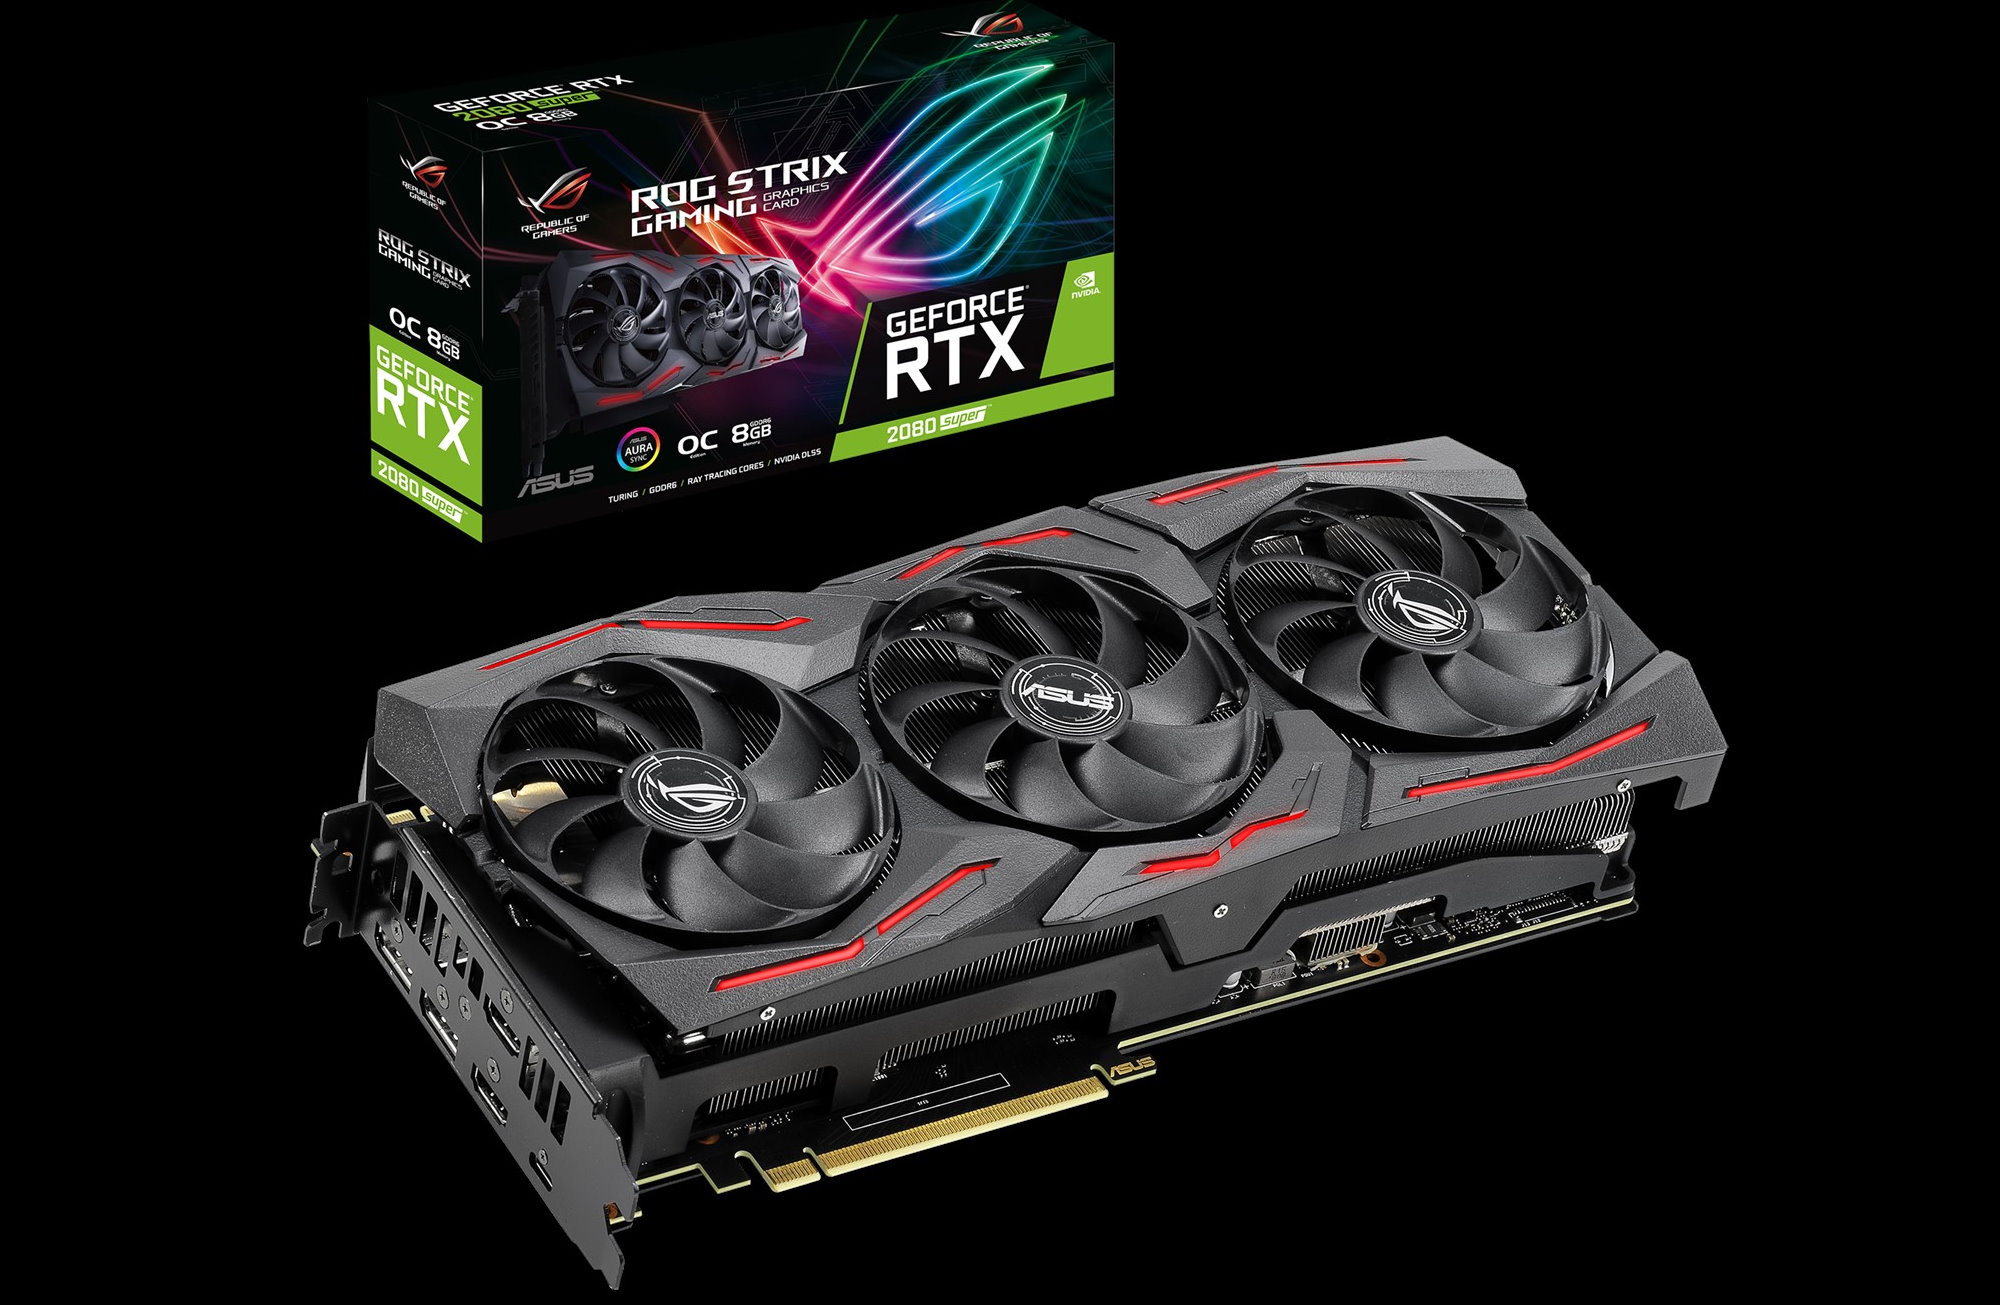 Asus ROG Strix RTX 2080 Super OC Review: Premium Card with a 